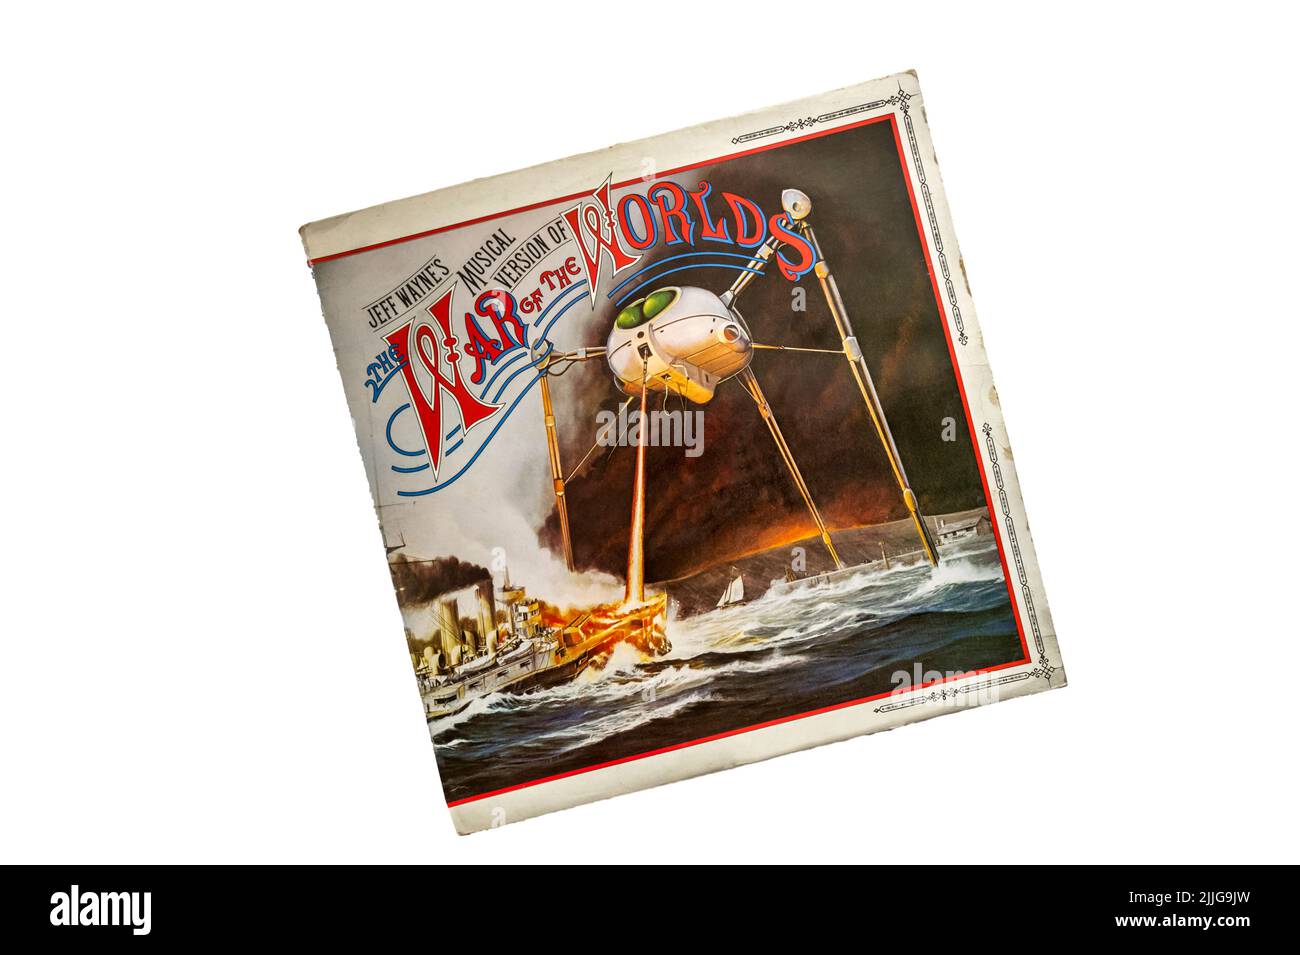 A copy of Jeff Wayne's Musical Version of The War of the Worlds.  Released in 1978. Stock Photo